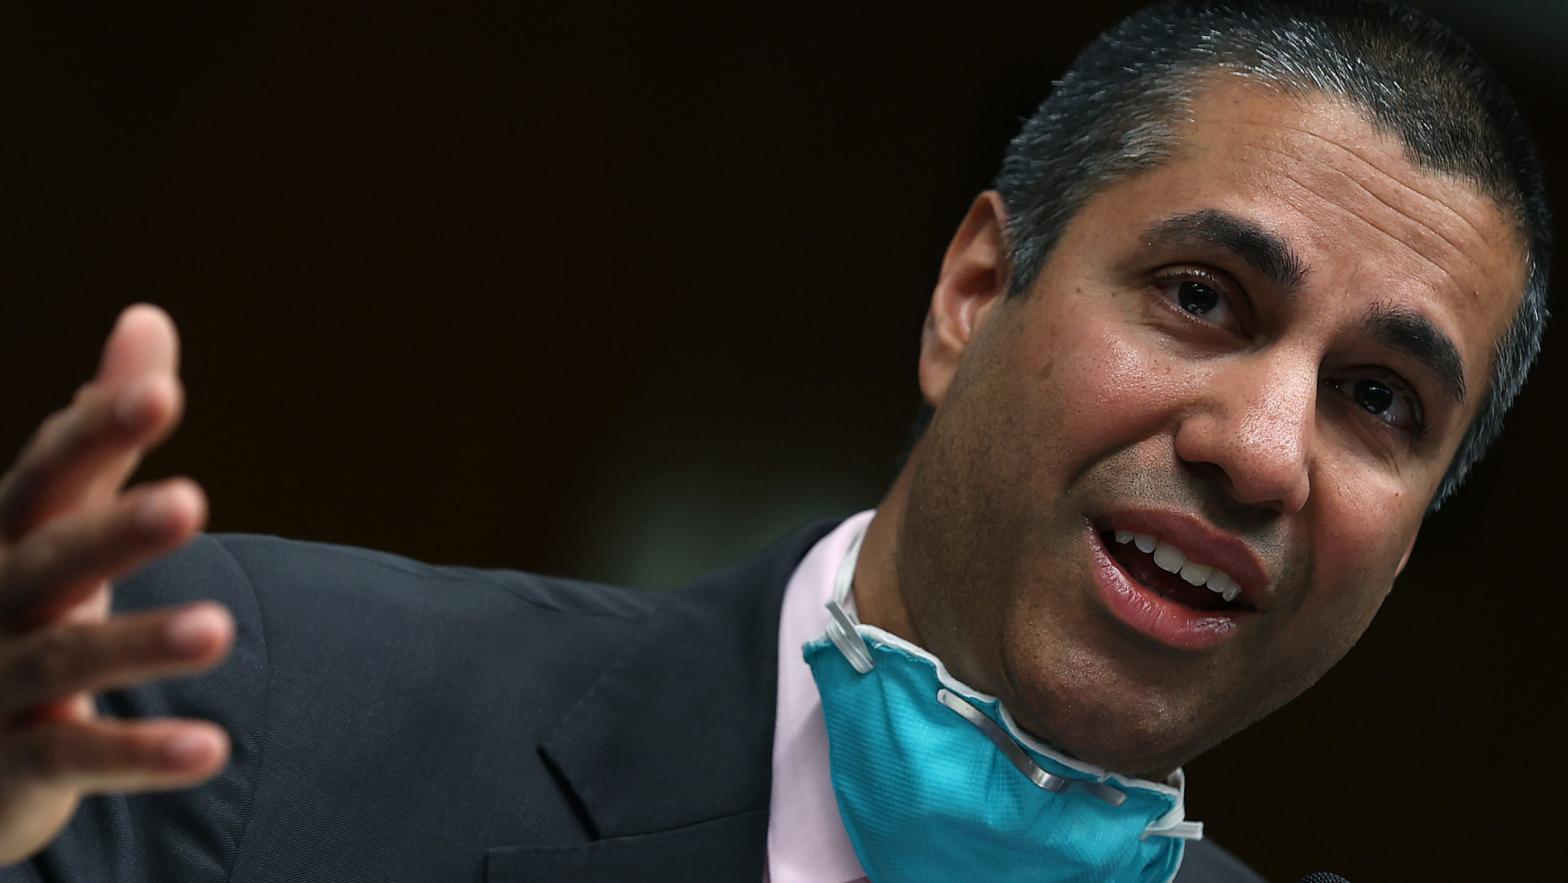 FCC Chairman Ajit Pai, the man who led the repeal of net neutrality protections. (Photo: Chip Somodevilla, Getty Images)